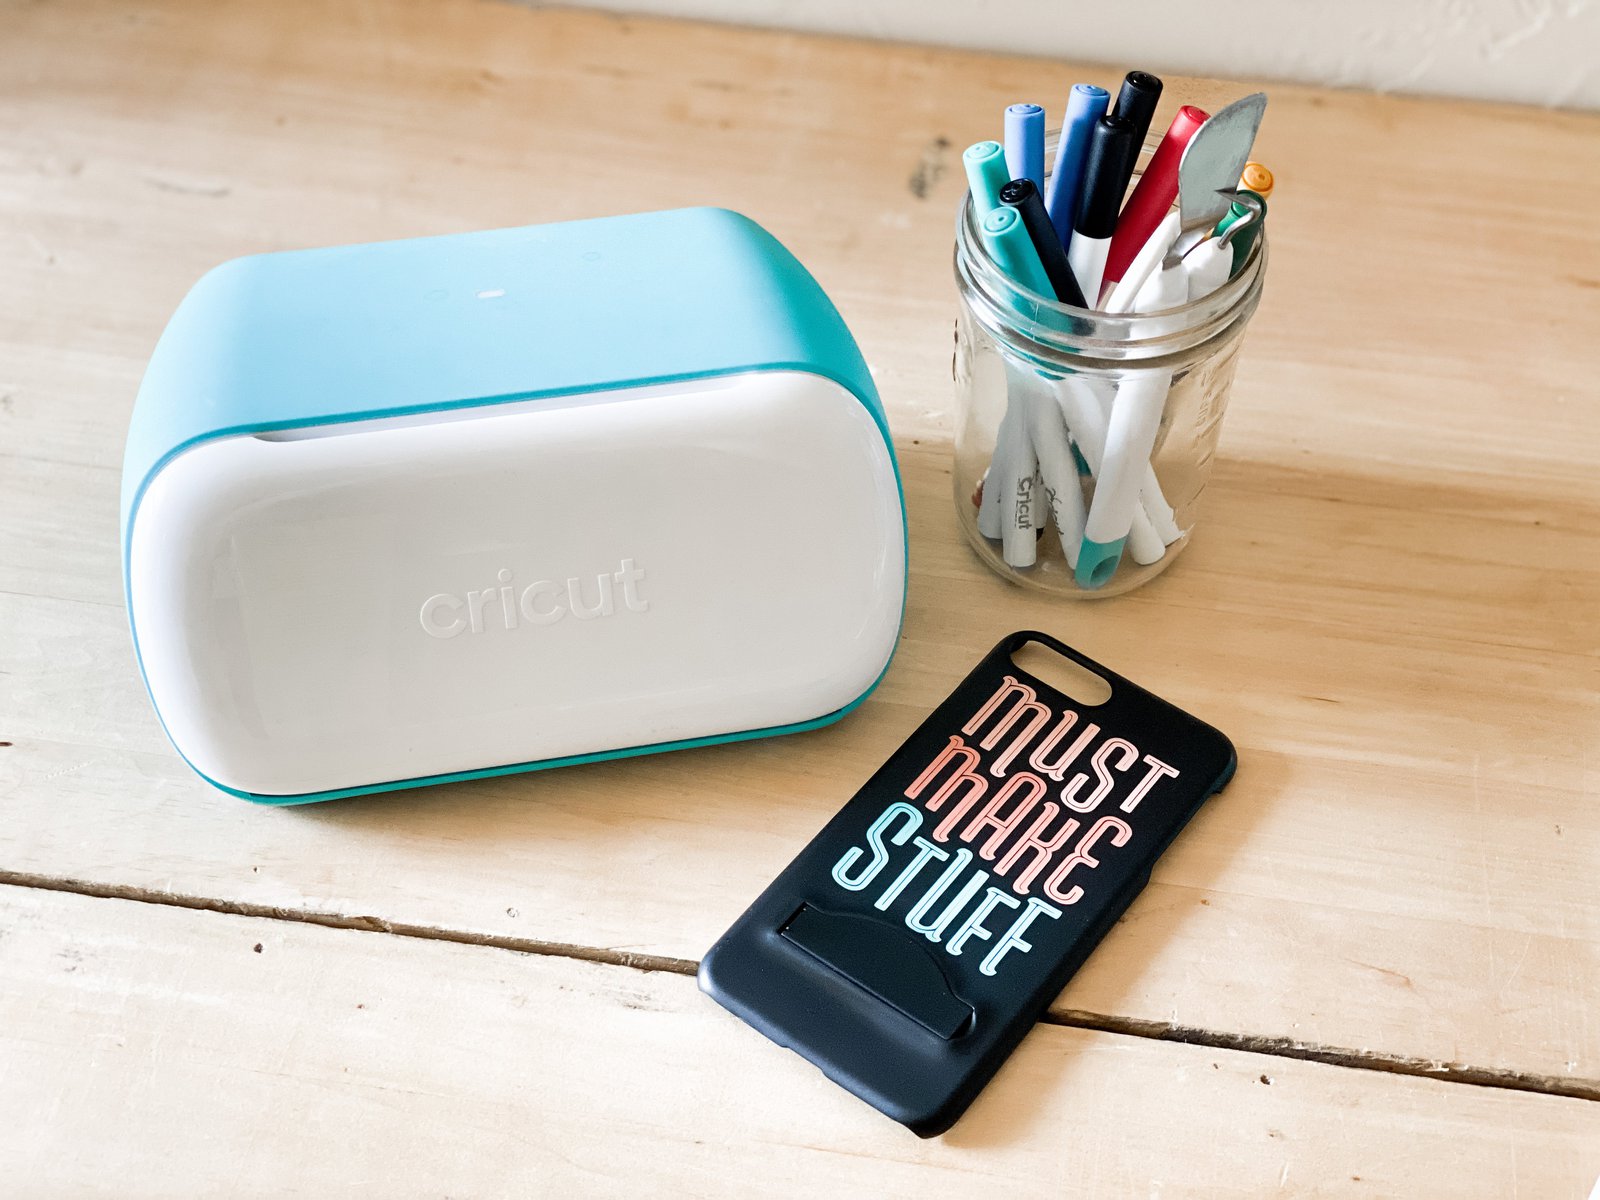 How to Make a Cell Phone Decal with Cricut Joy